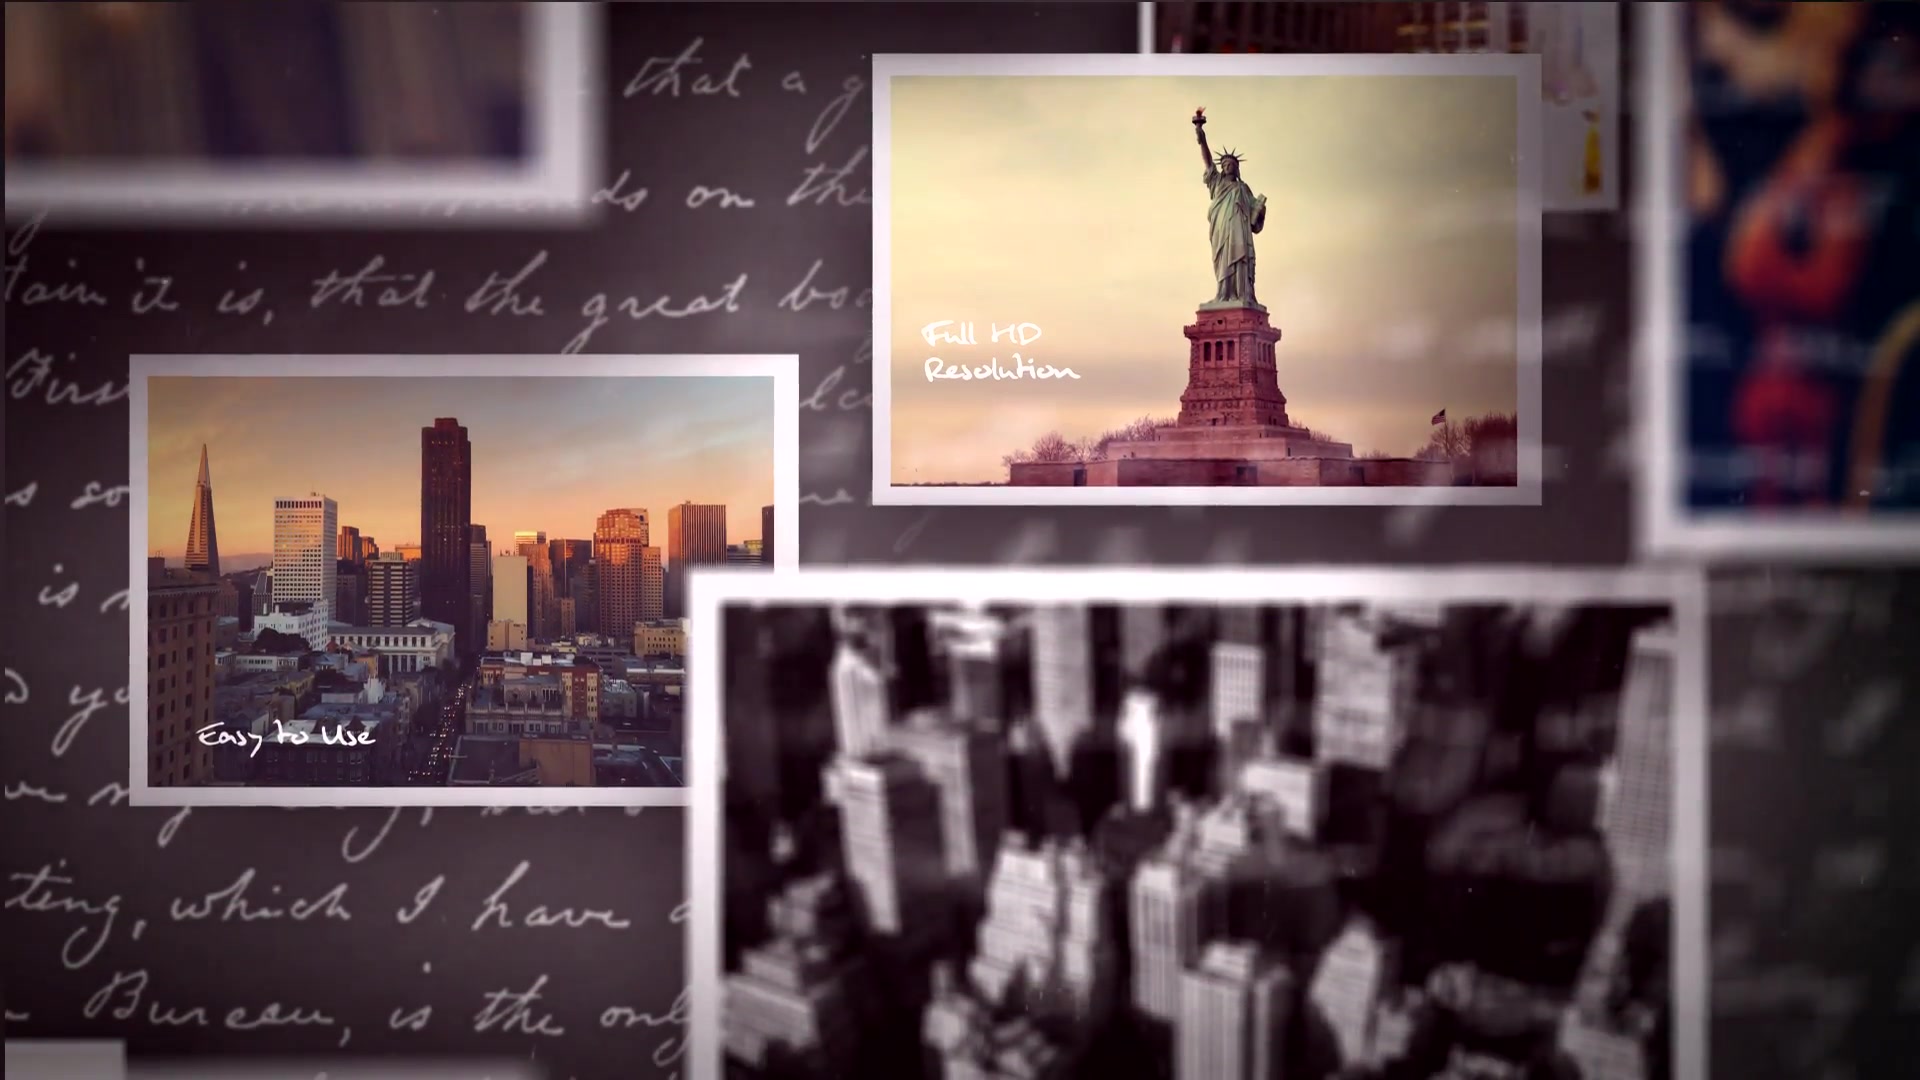 Memories of Moments - Download Videohive 19663100